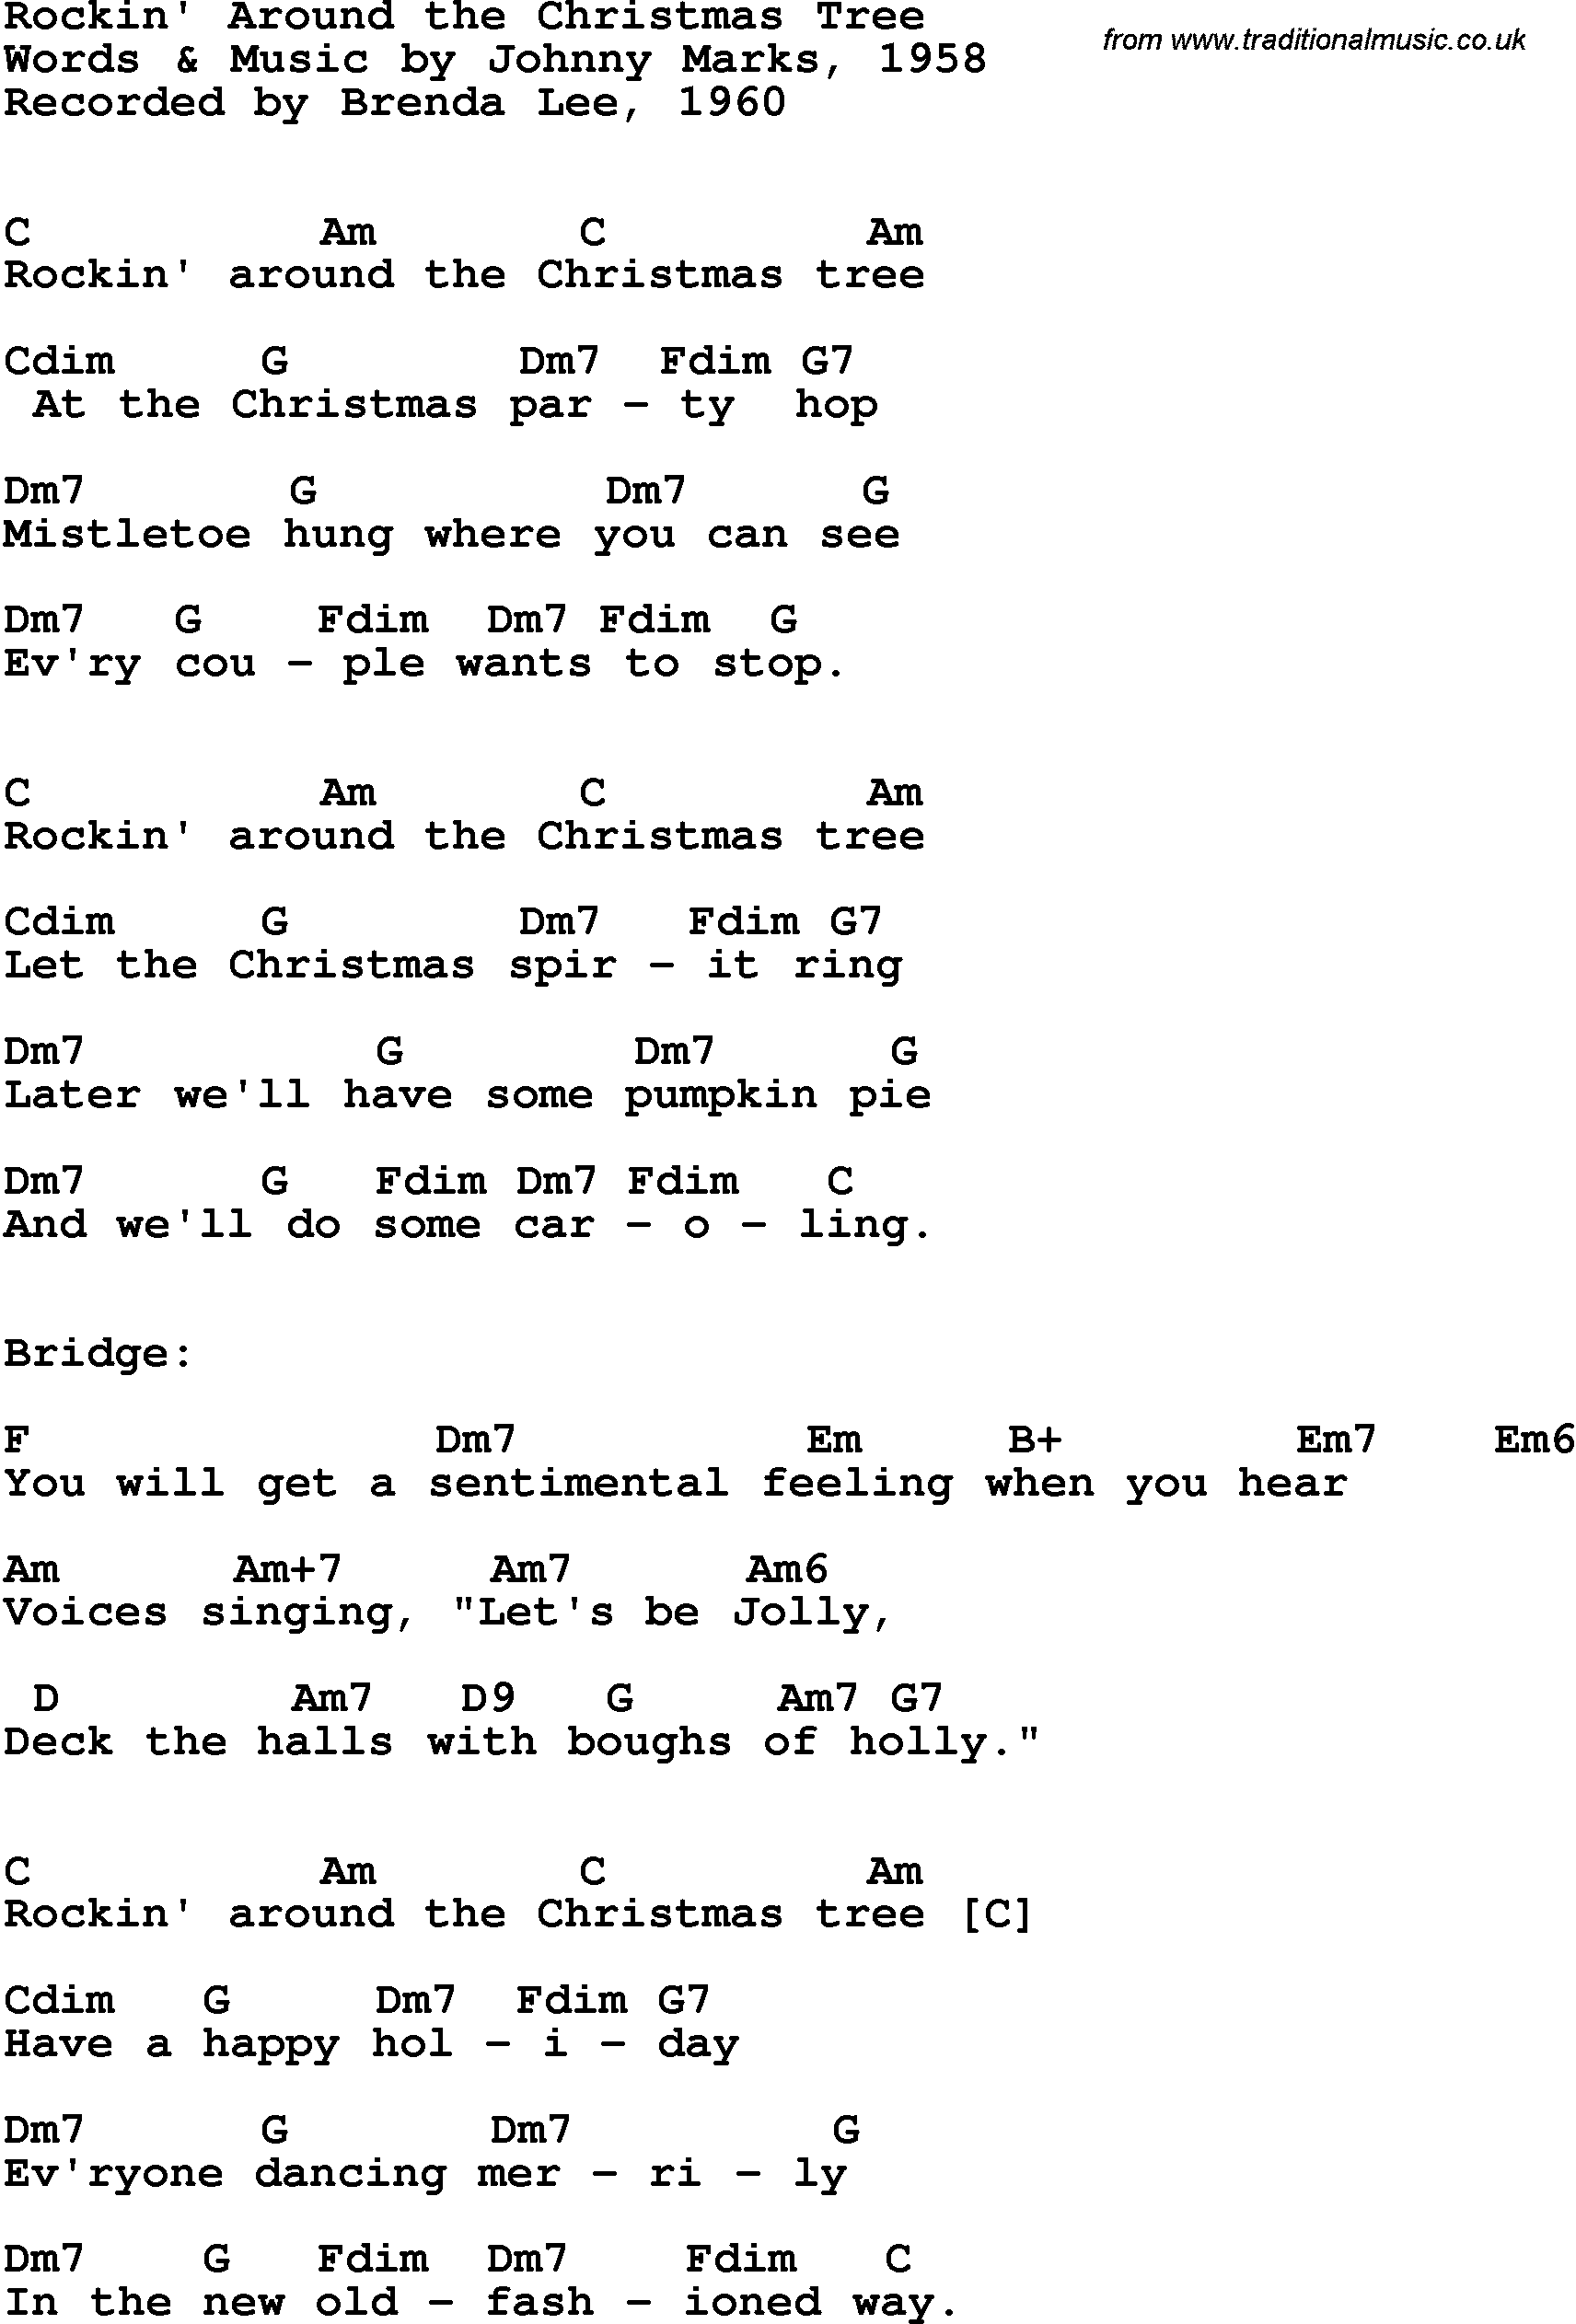 Song lyrics with guitar chords for Rockin' Around The Christmas Tree - Brenda  Lee, 1960